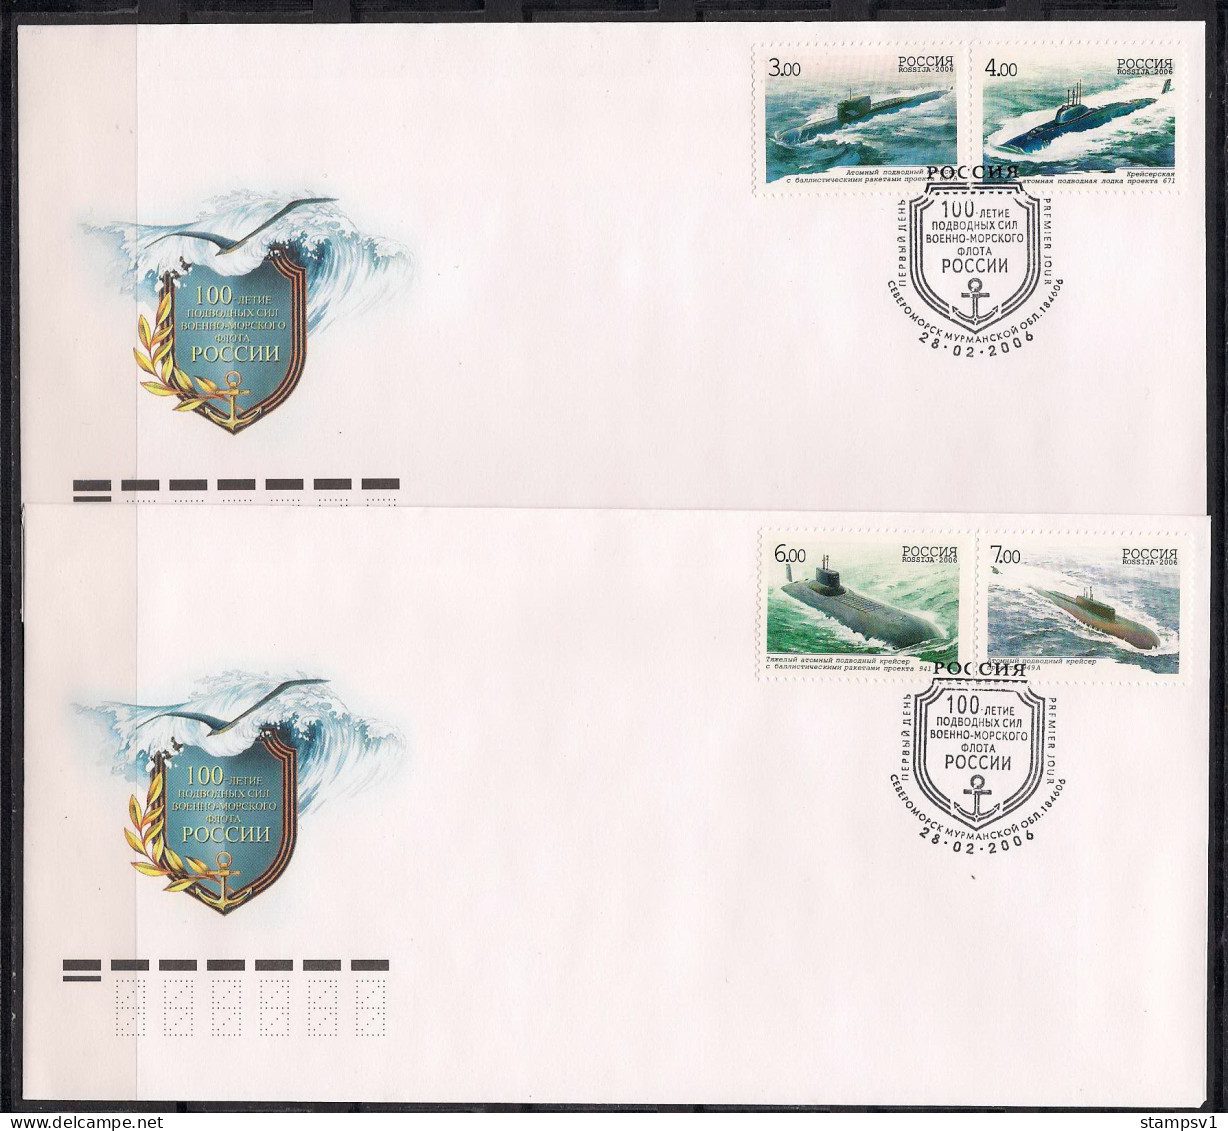 Russia 2006 The 100th Anniversary Of The Russian Navy Underwater Forces. Mi 1311-14 FDC - FDC